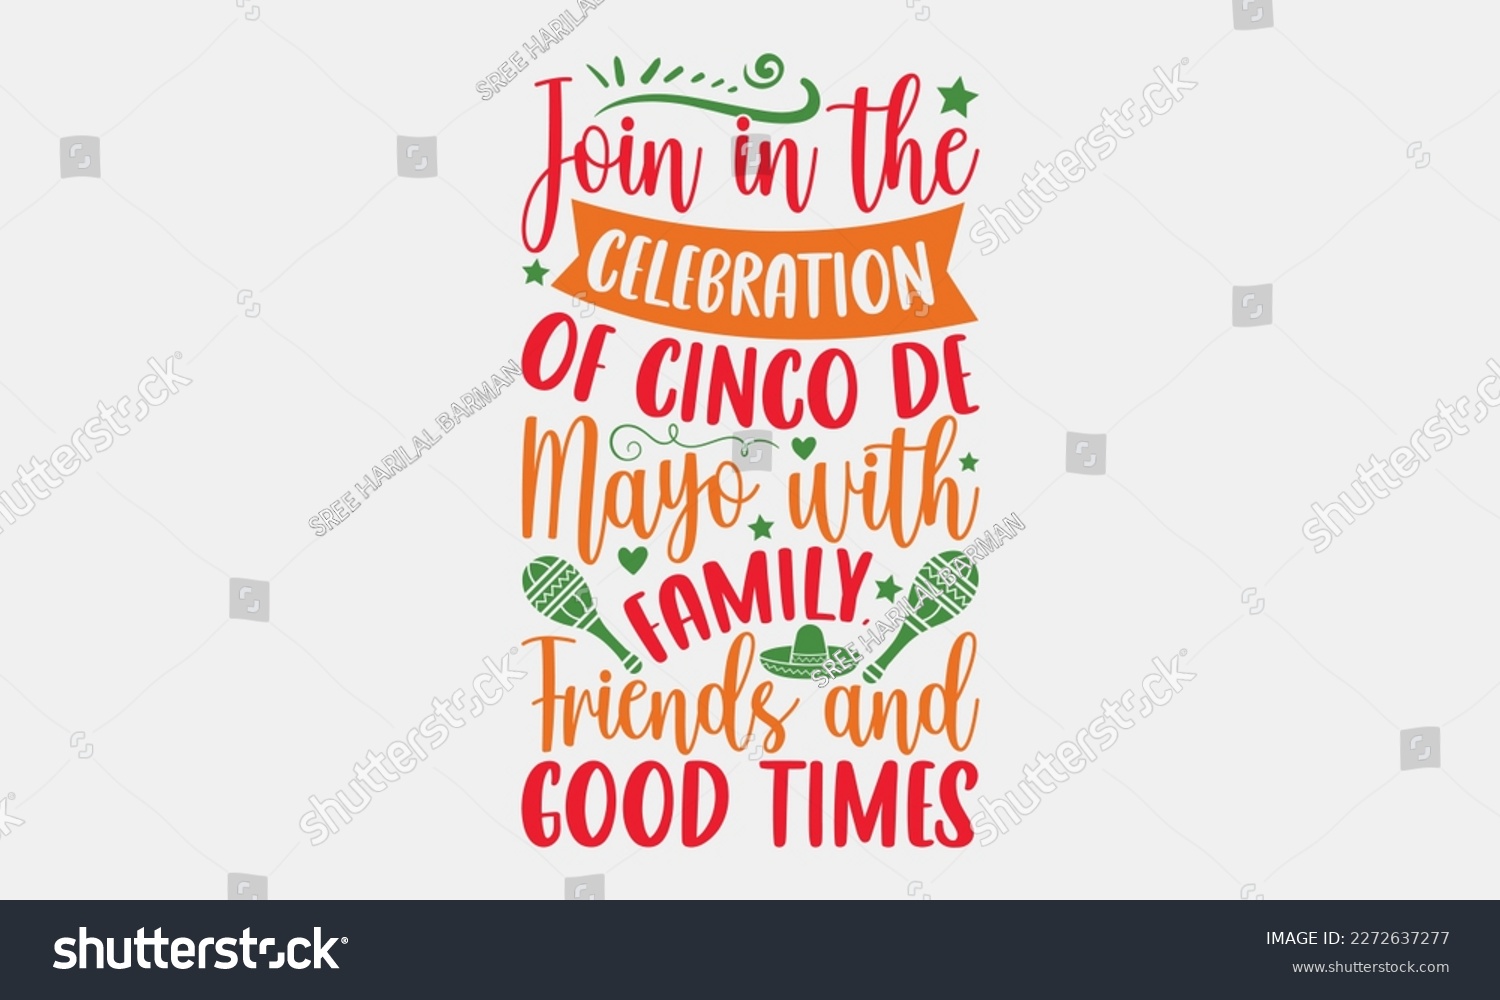 SVG of Join in the celebration of Cinco de Mayo with family, friends and good times - Cinco de Mayo svg typography t-shirt design, Hand drawn lettering phrase, Calligraphy t-shirt design, eps 10. svg